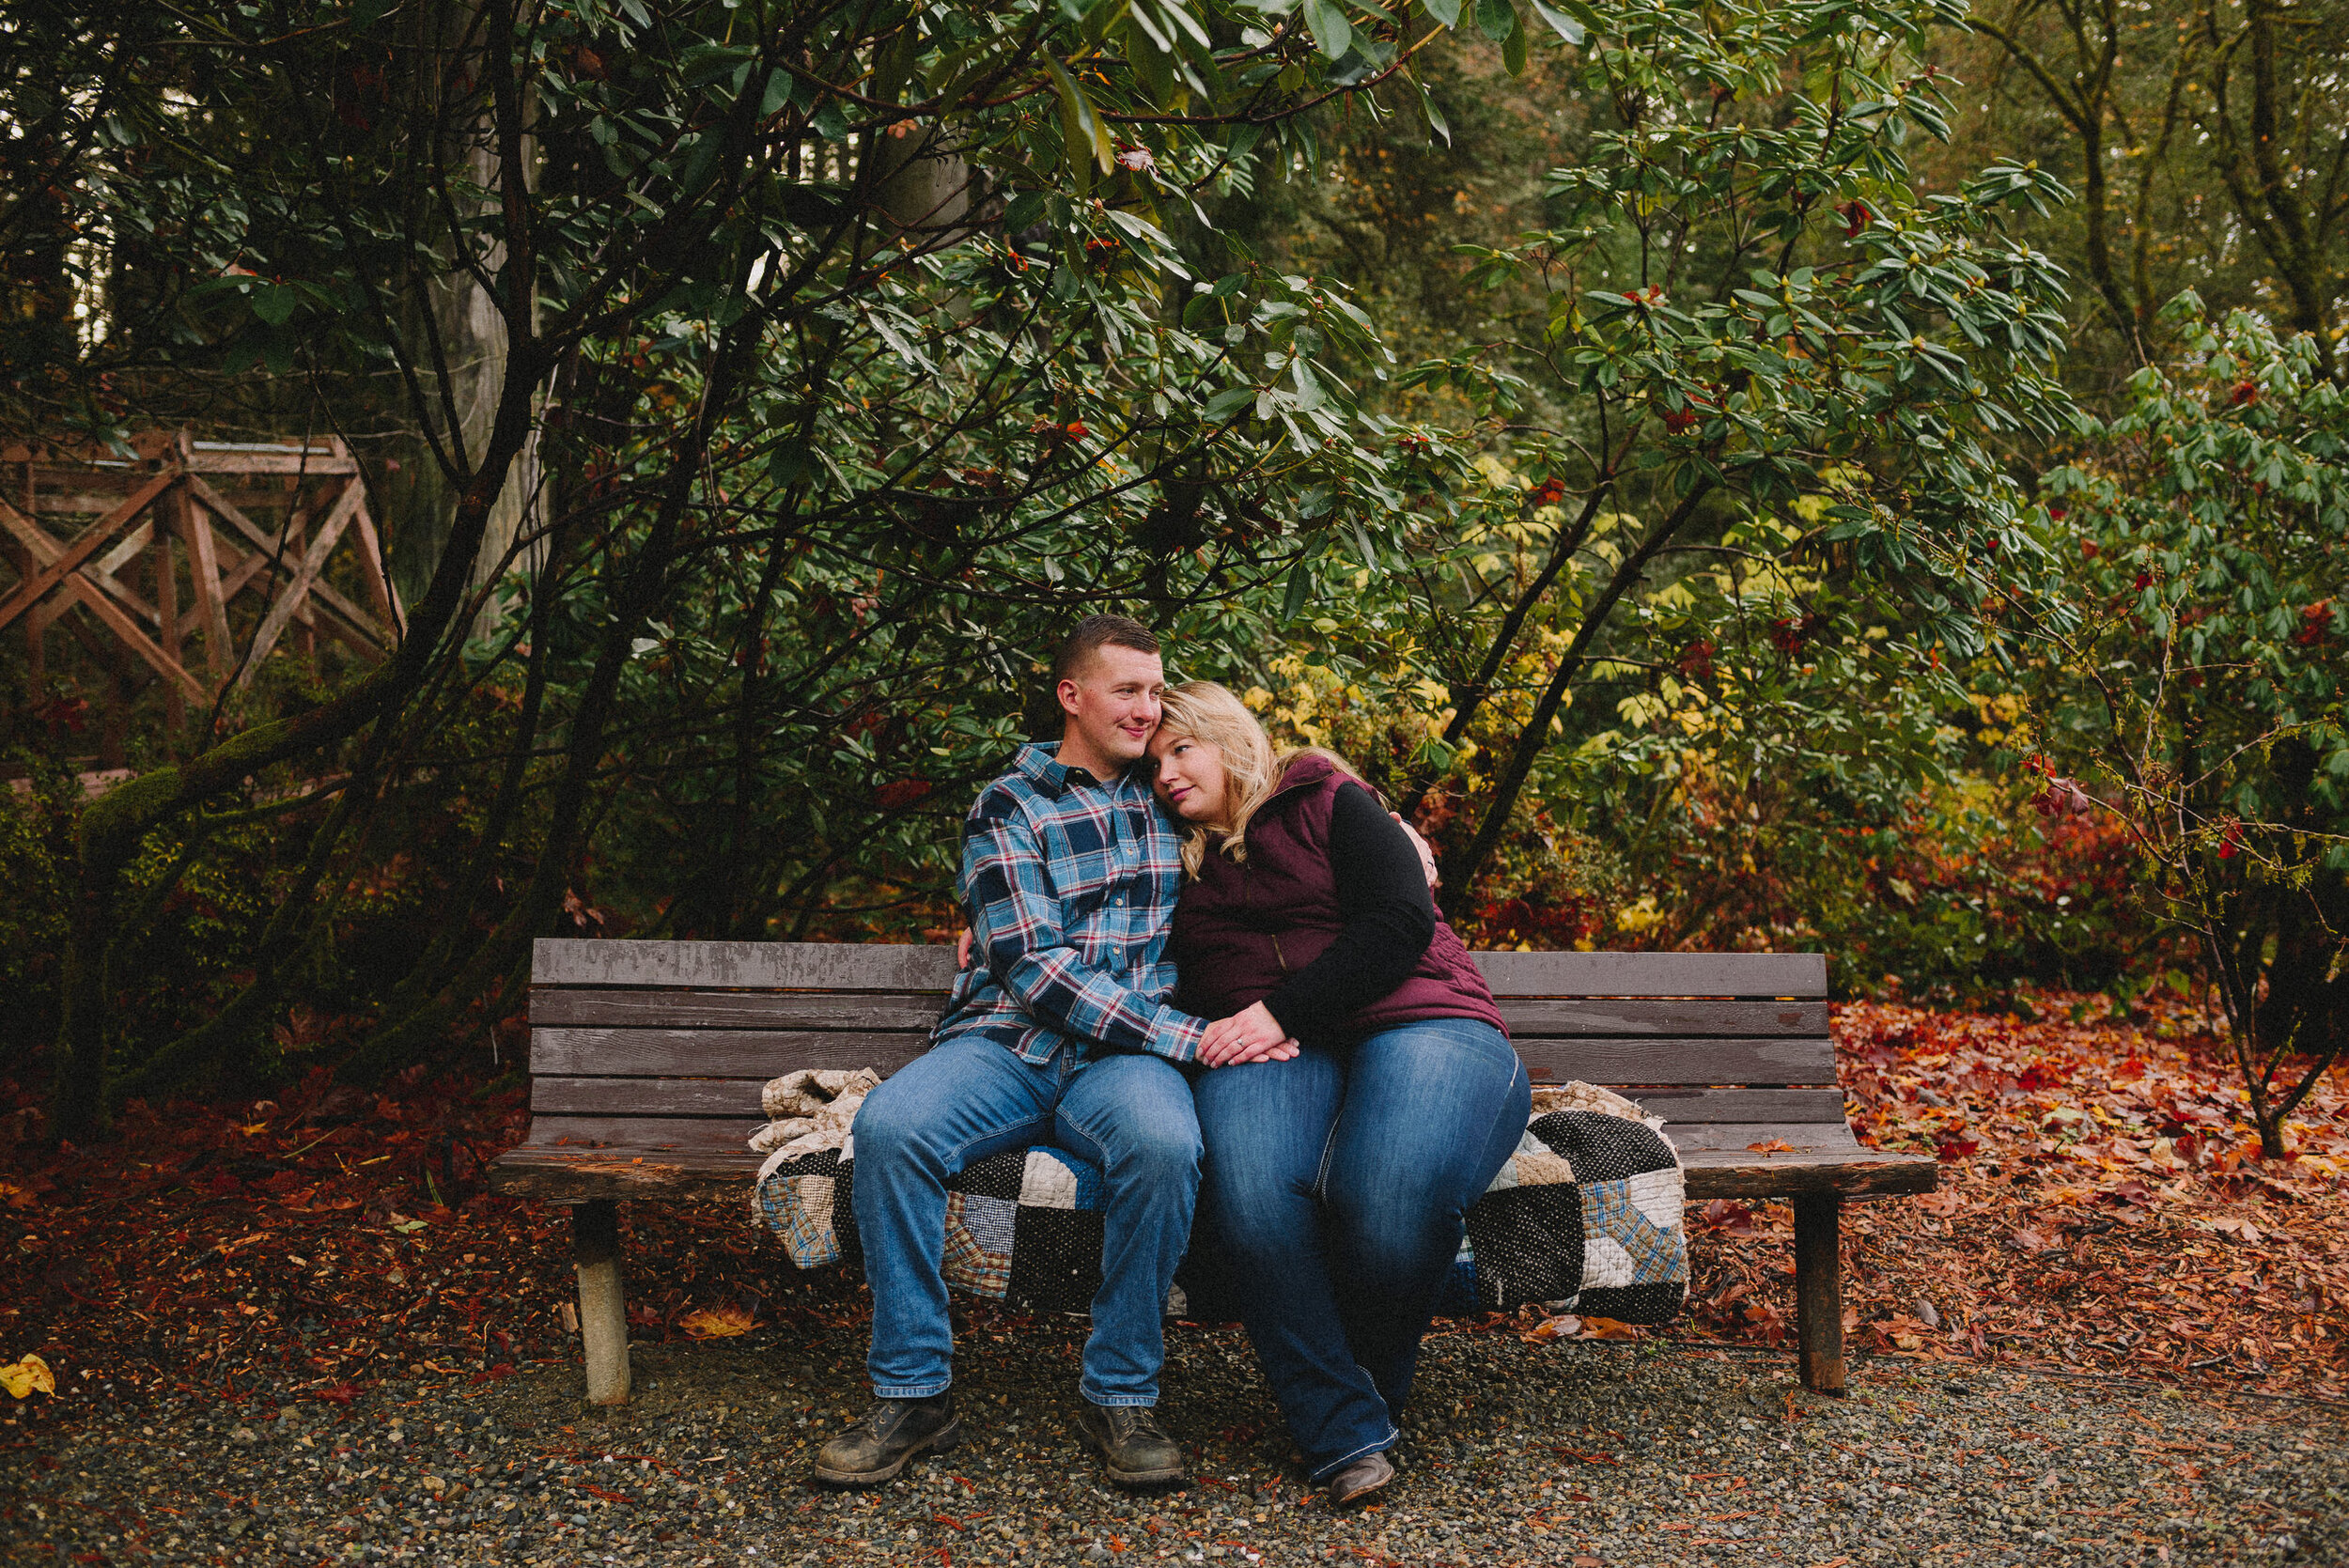 priest-point-park-couples-session-olympia-washington-way-up-north-photography (175).jpg